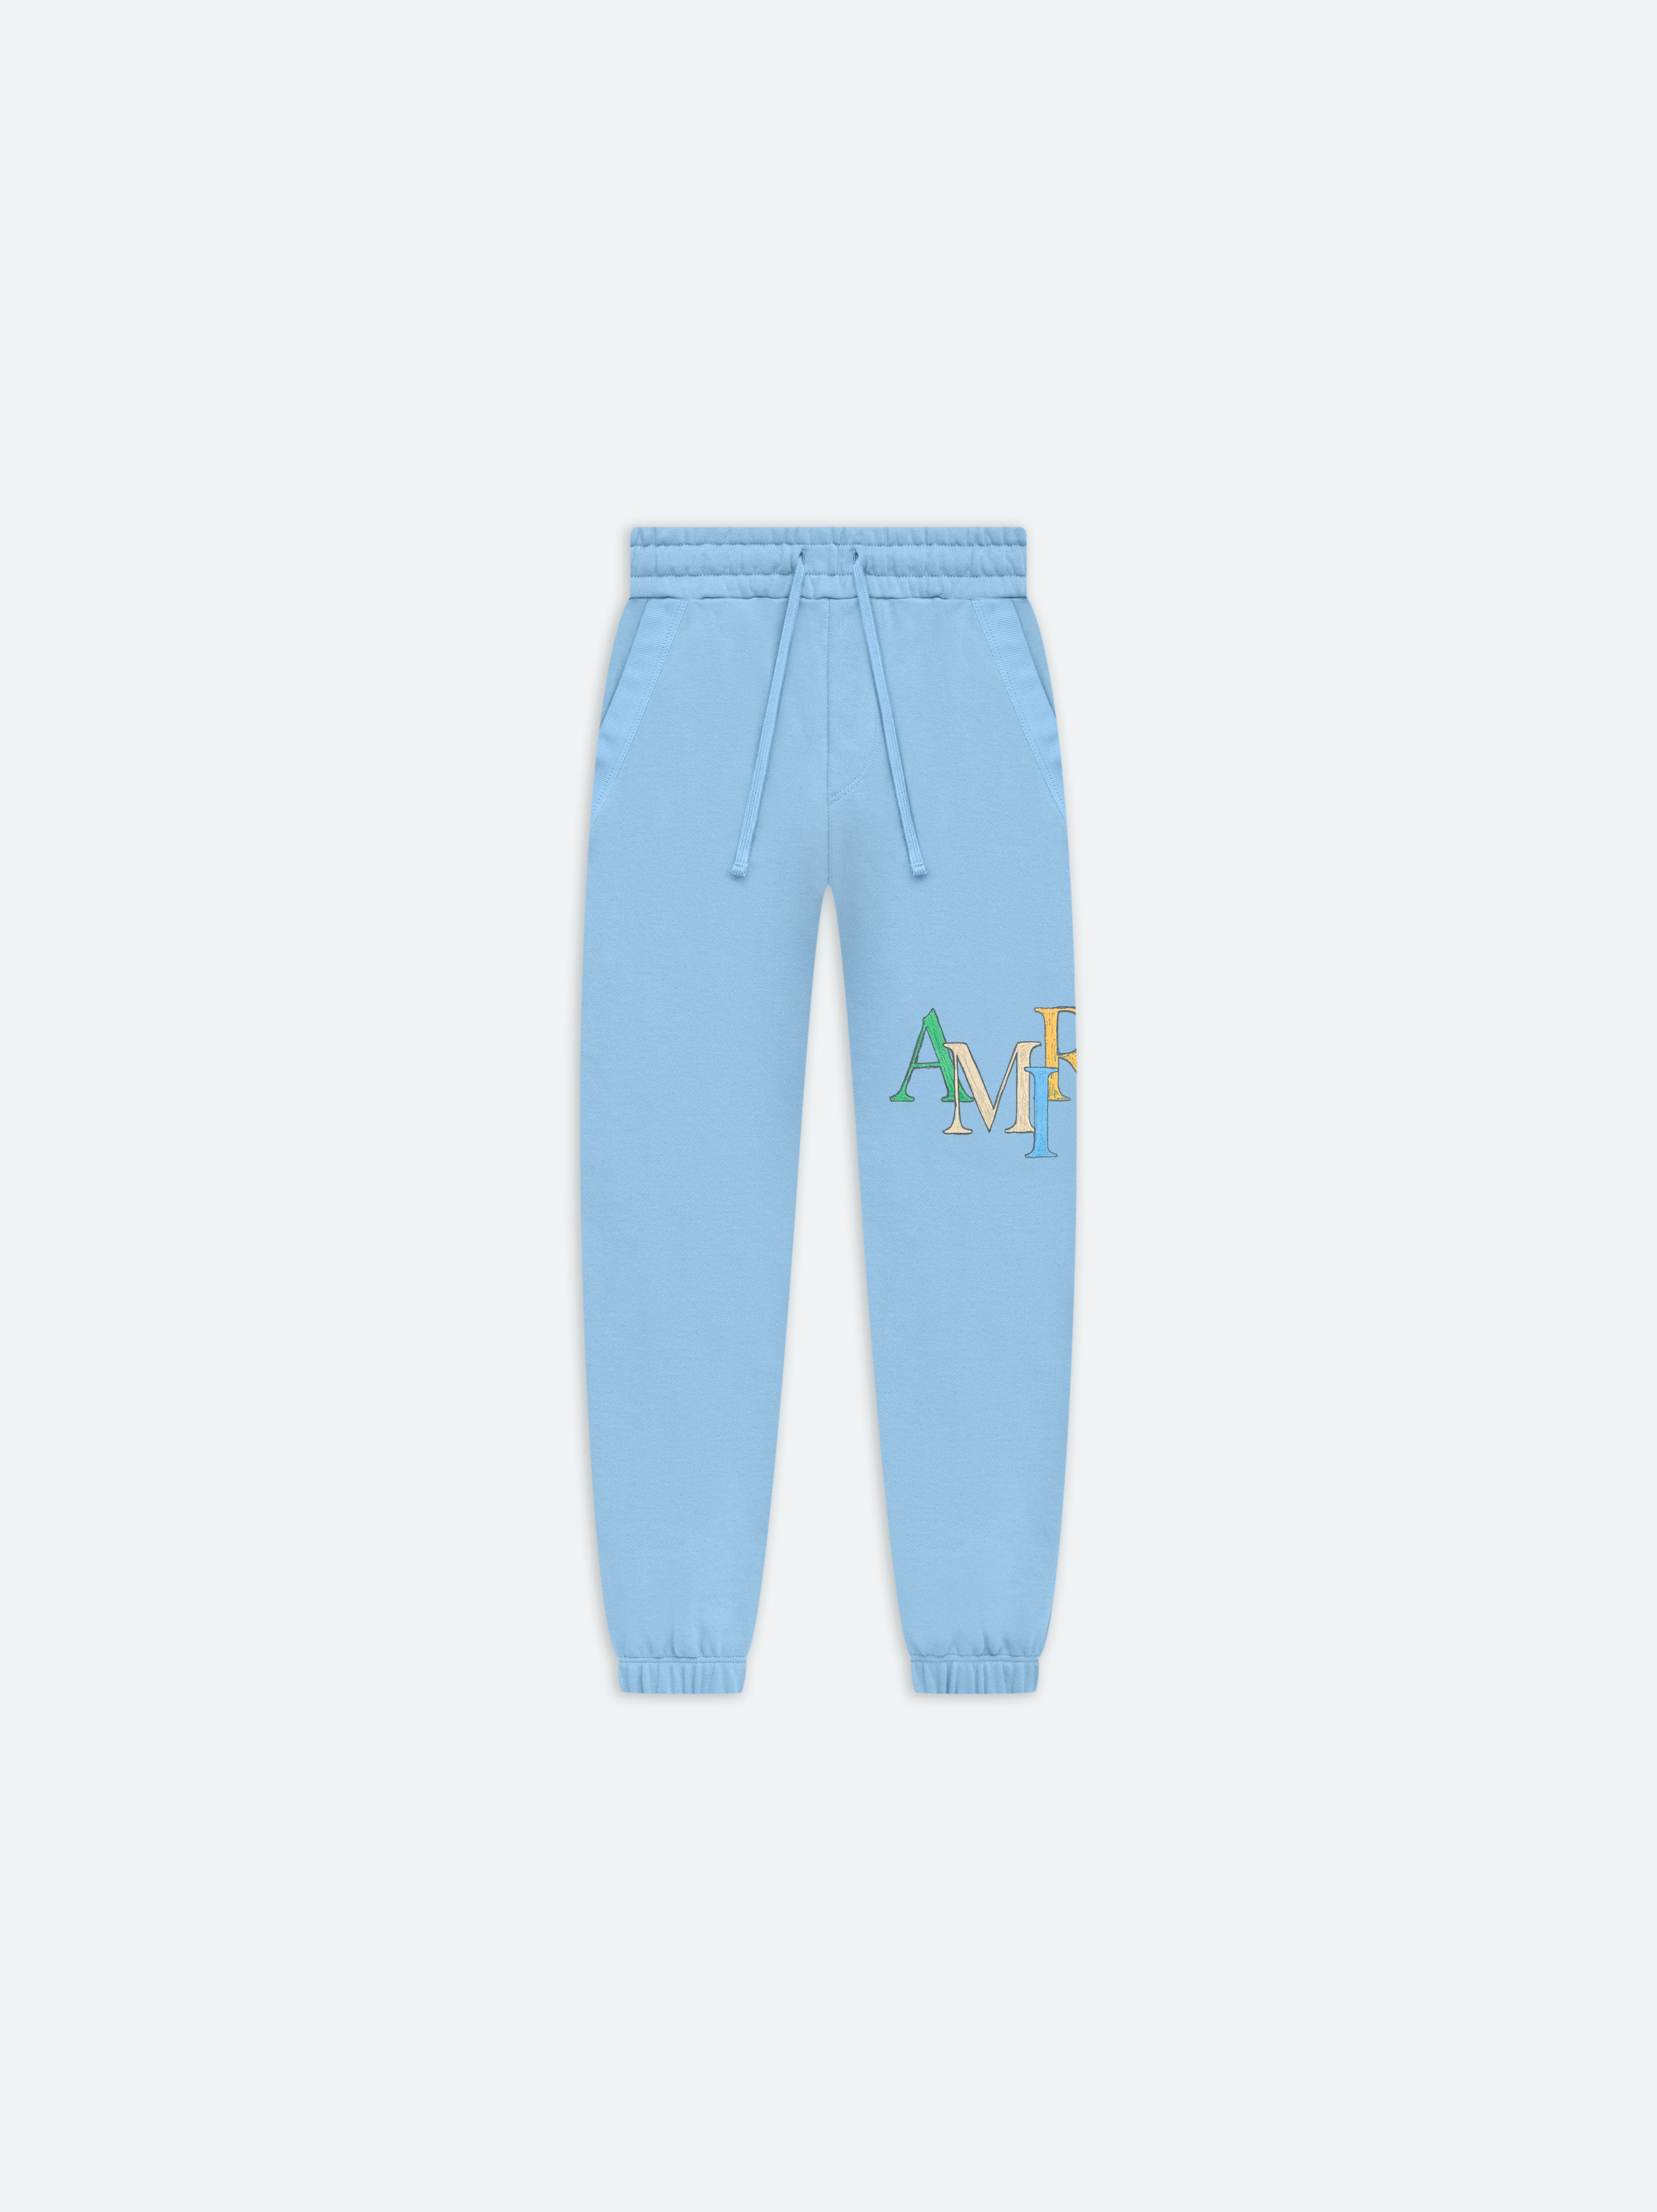 Product KIDS - AMIRI STAGGERED SCRIBBLE SWEATPANT - Air Blue featured image